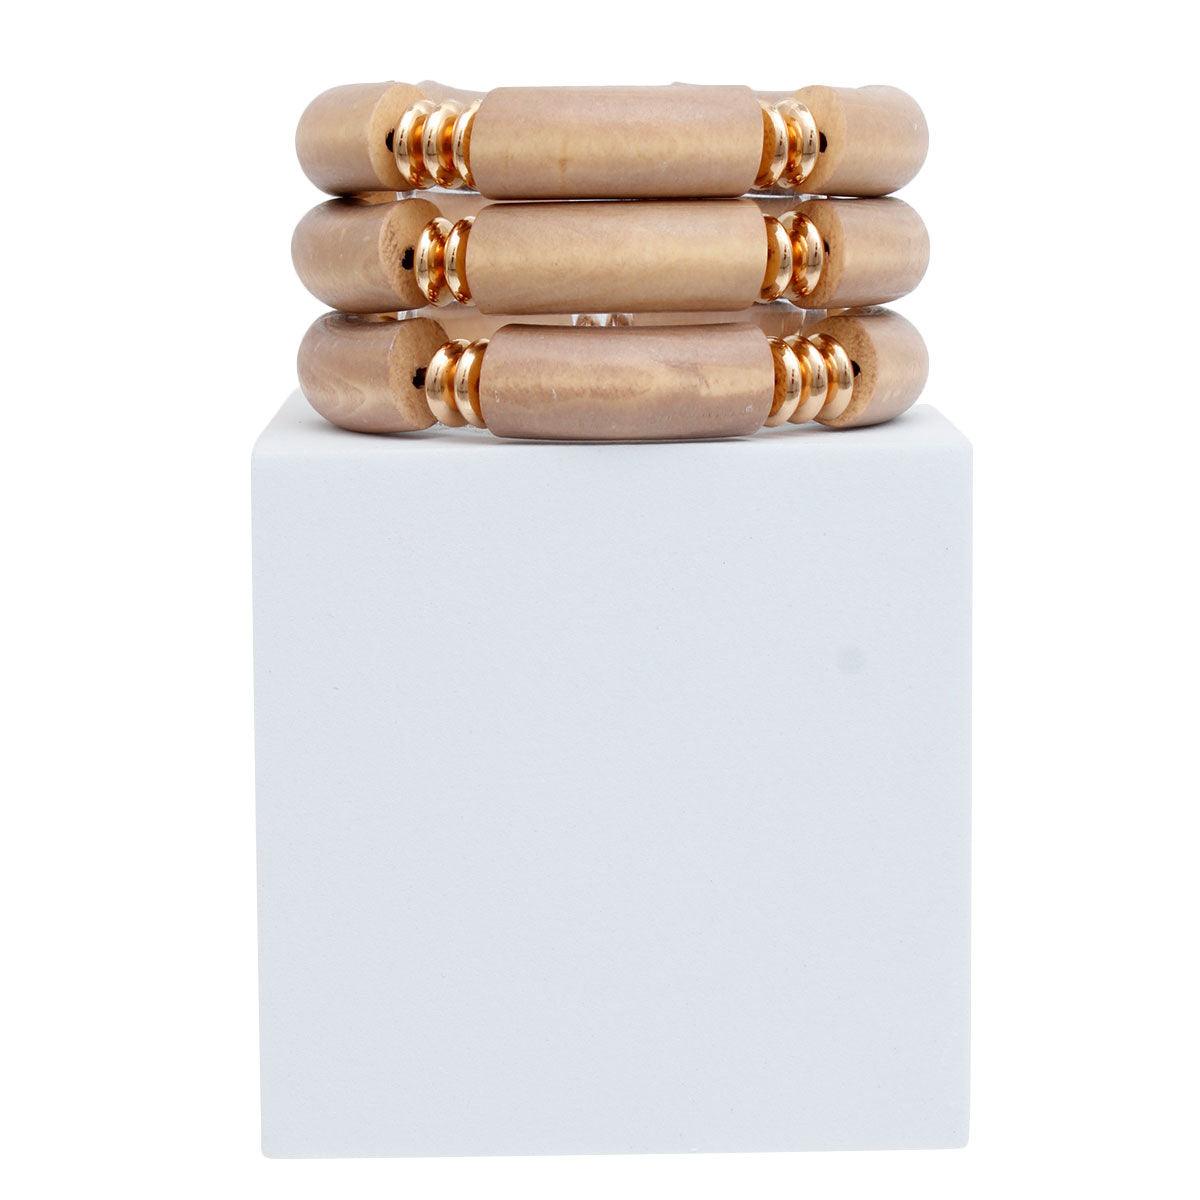 Unique Brown Wood Bangle Set for a Stylish Look